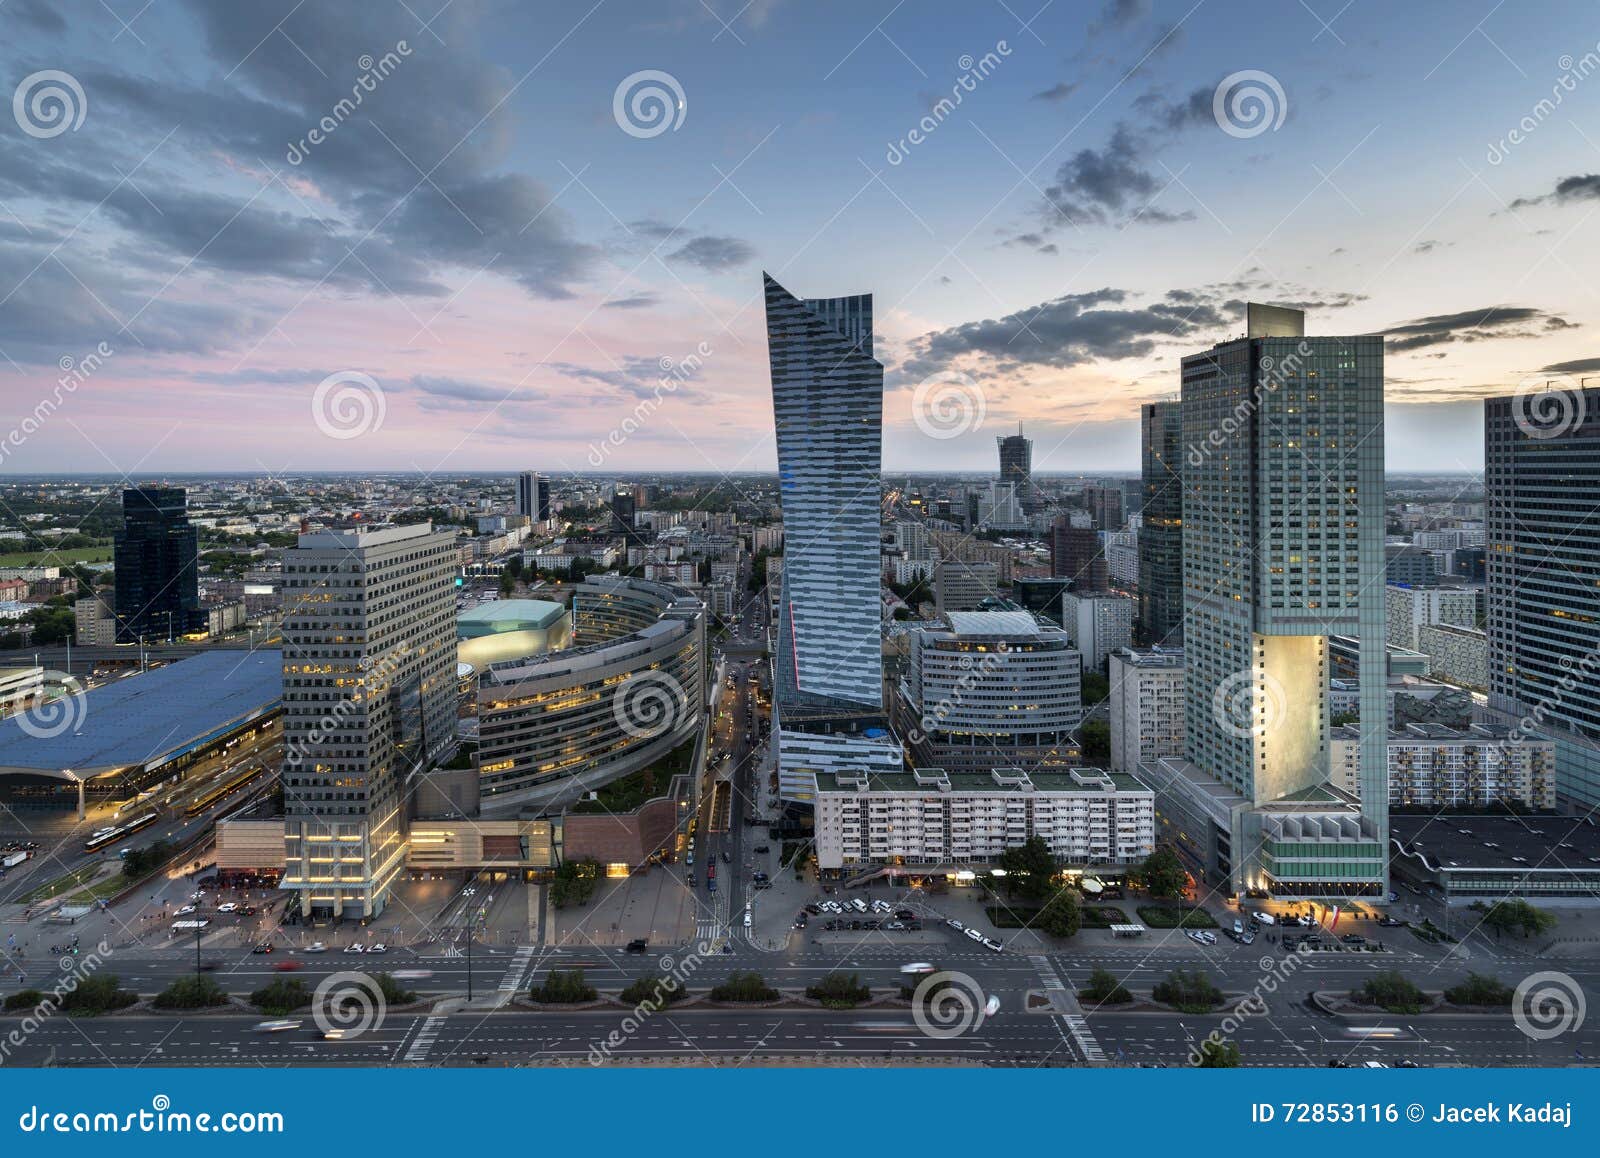 aerial view of warsaw downtown at dusk time